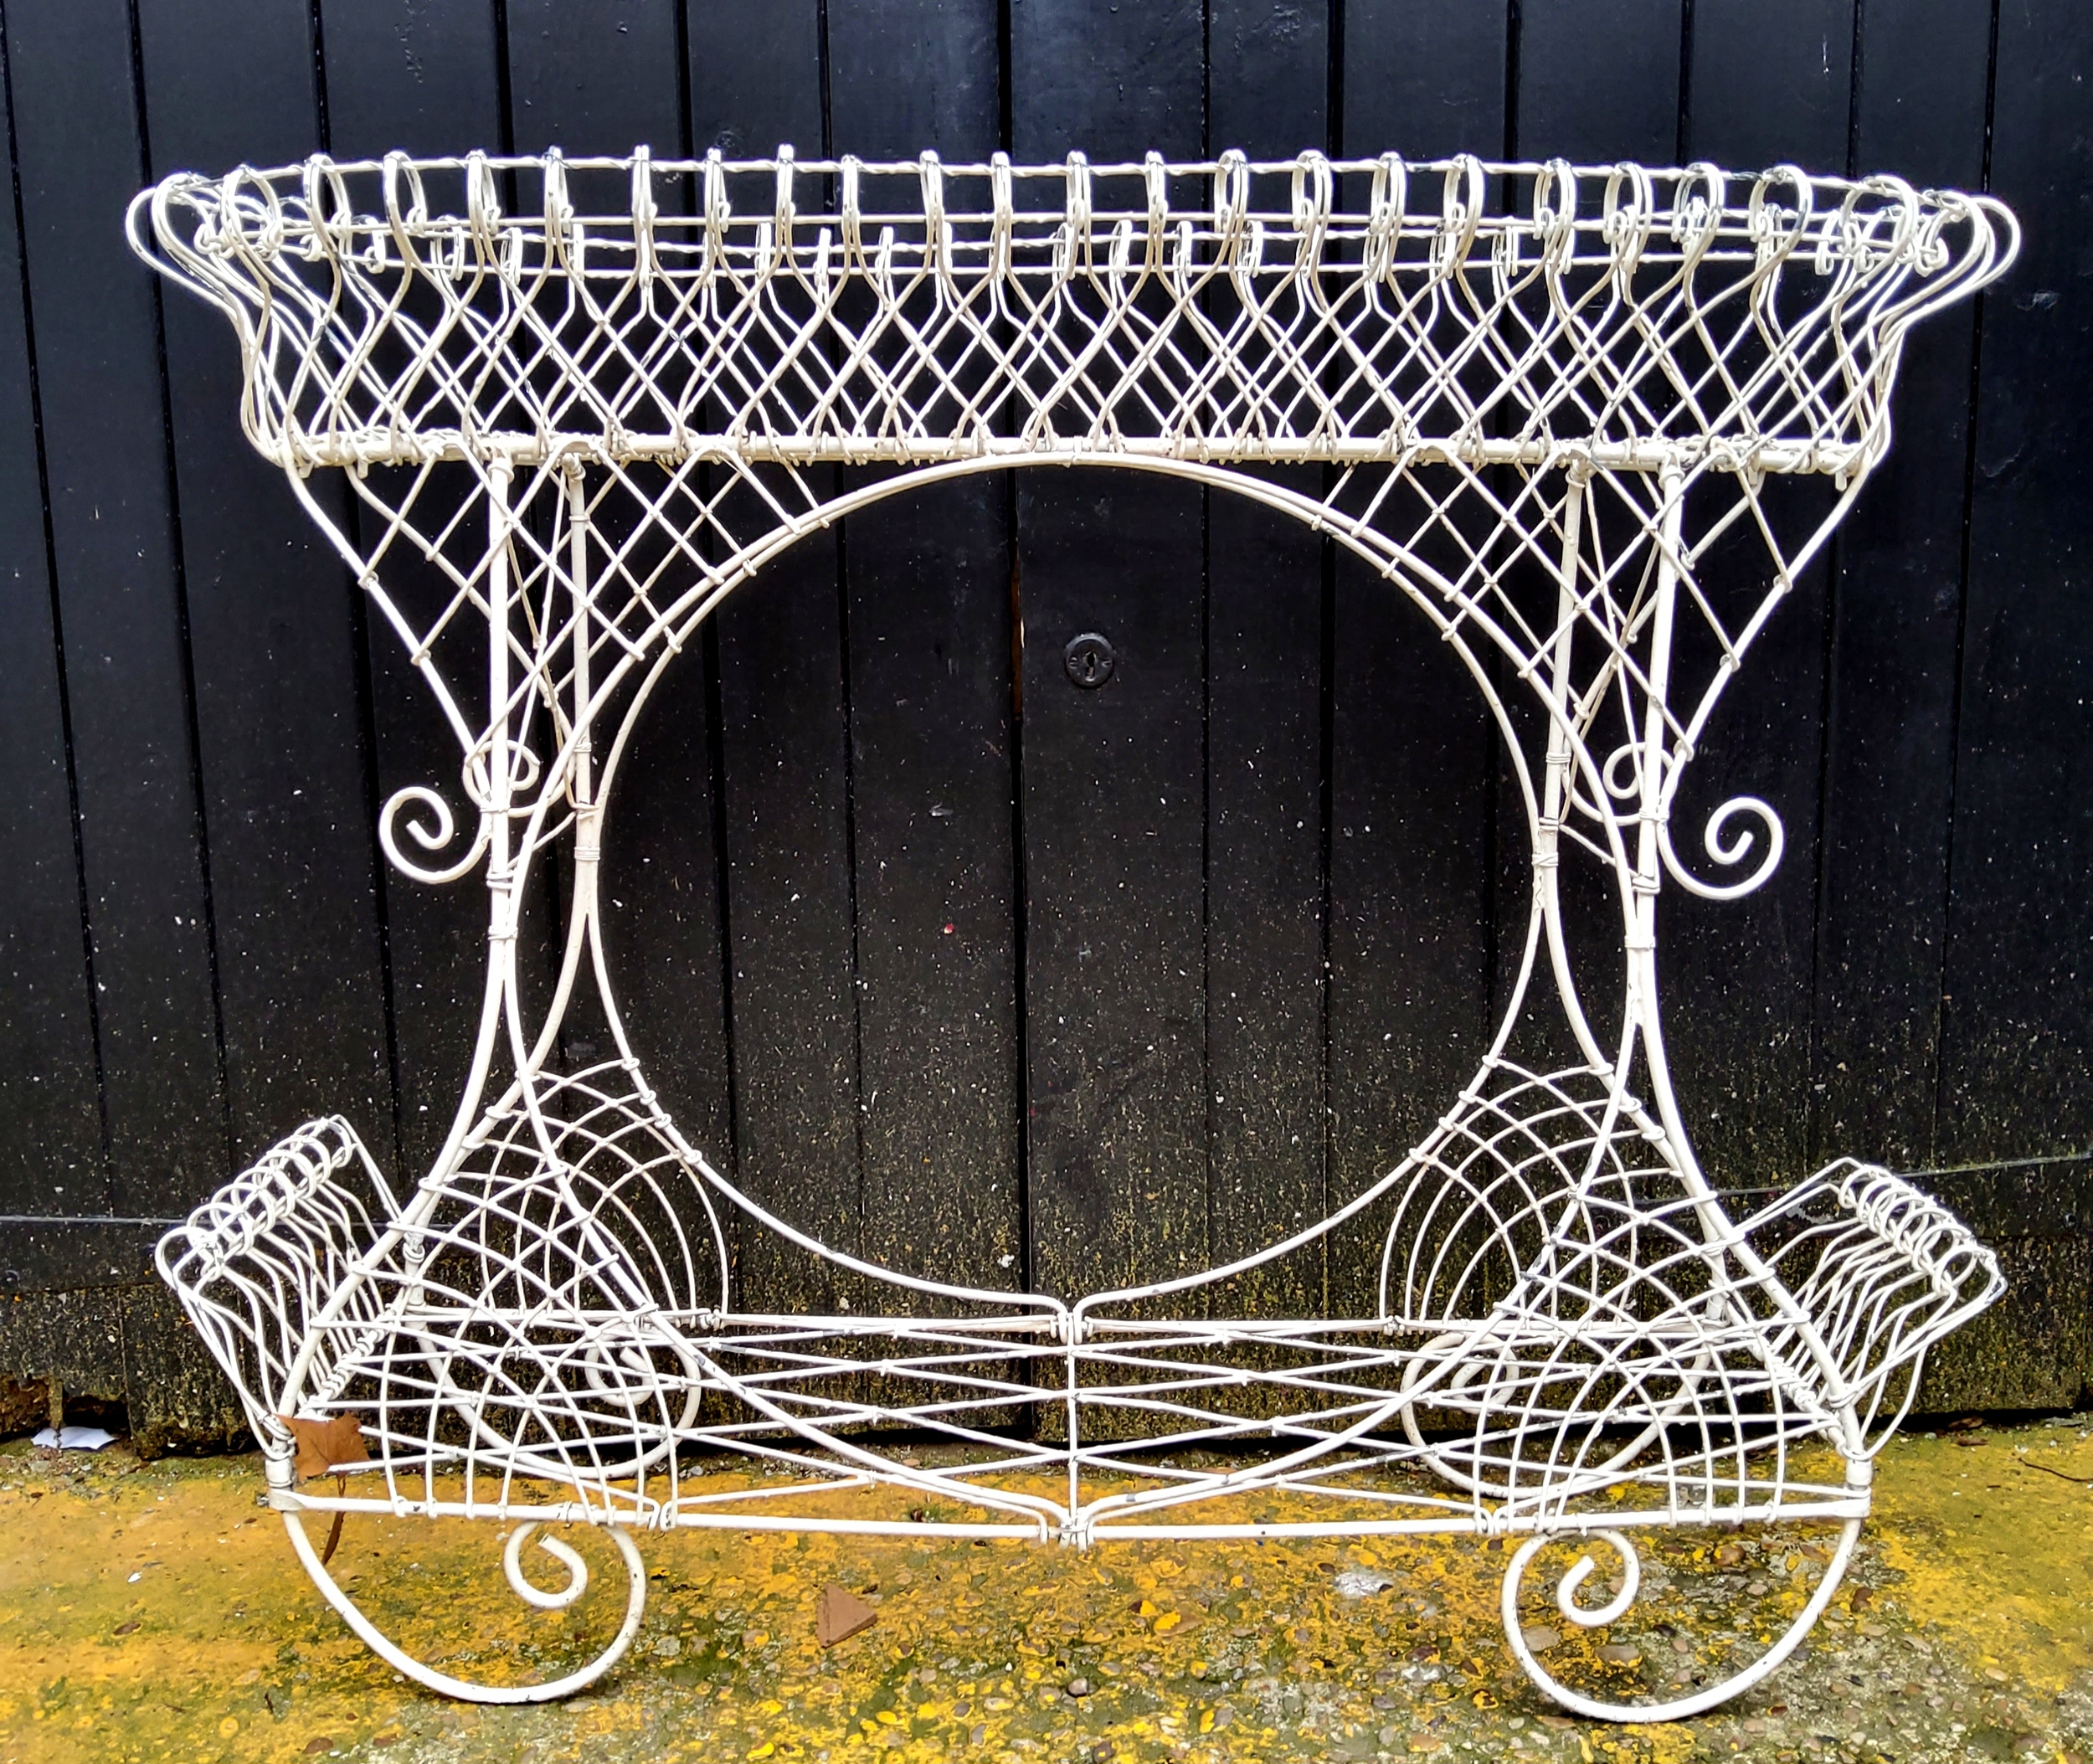 An ornate 20th century metal plant stand, painted white